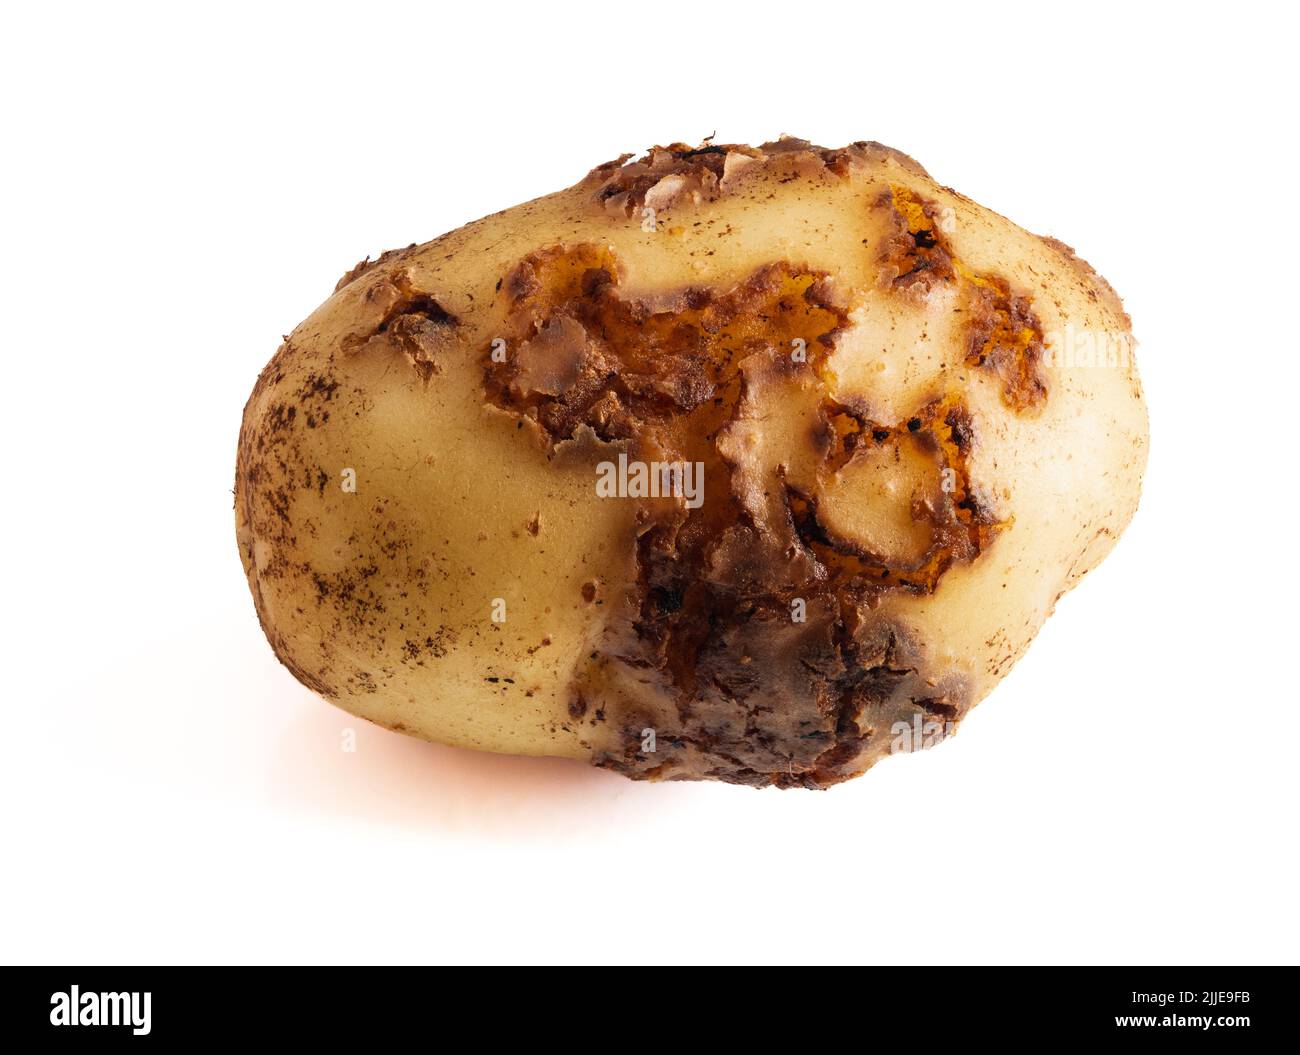 Warty lesions of the bacterial disease common scab, Streptomyces scabies, on first early potato 'Swift'. White background Stock Photo